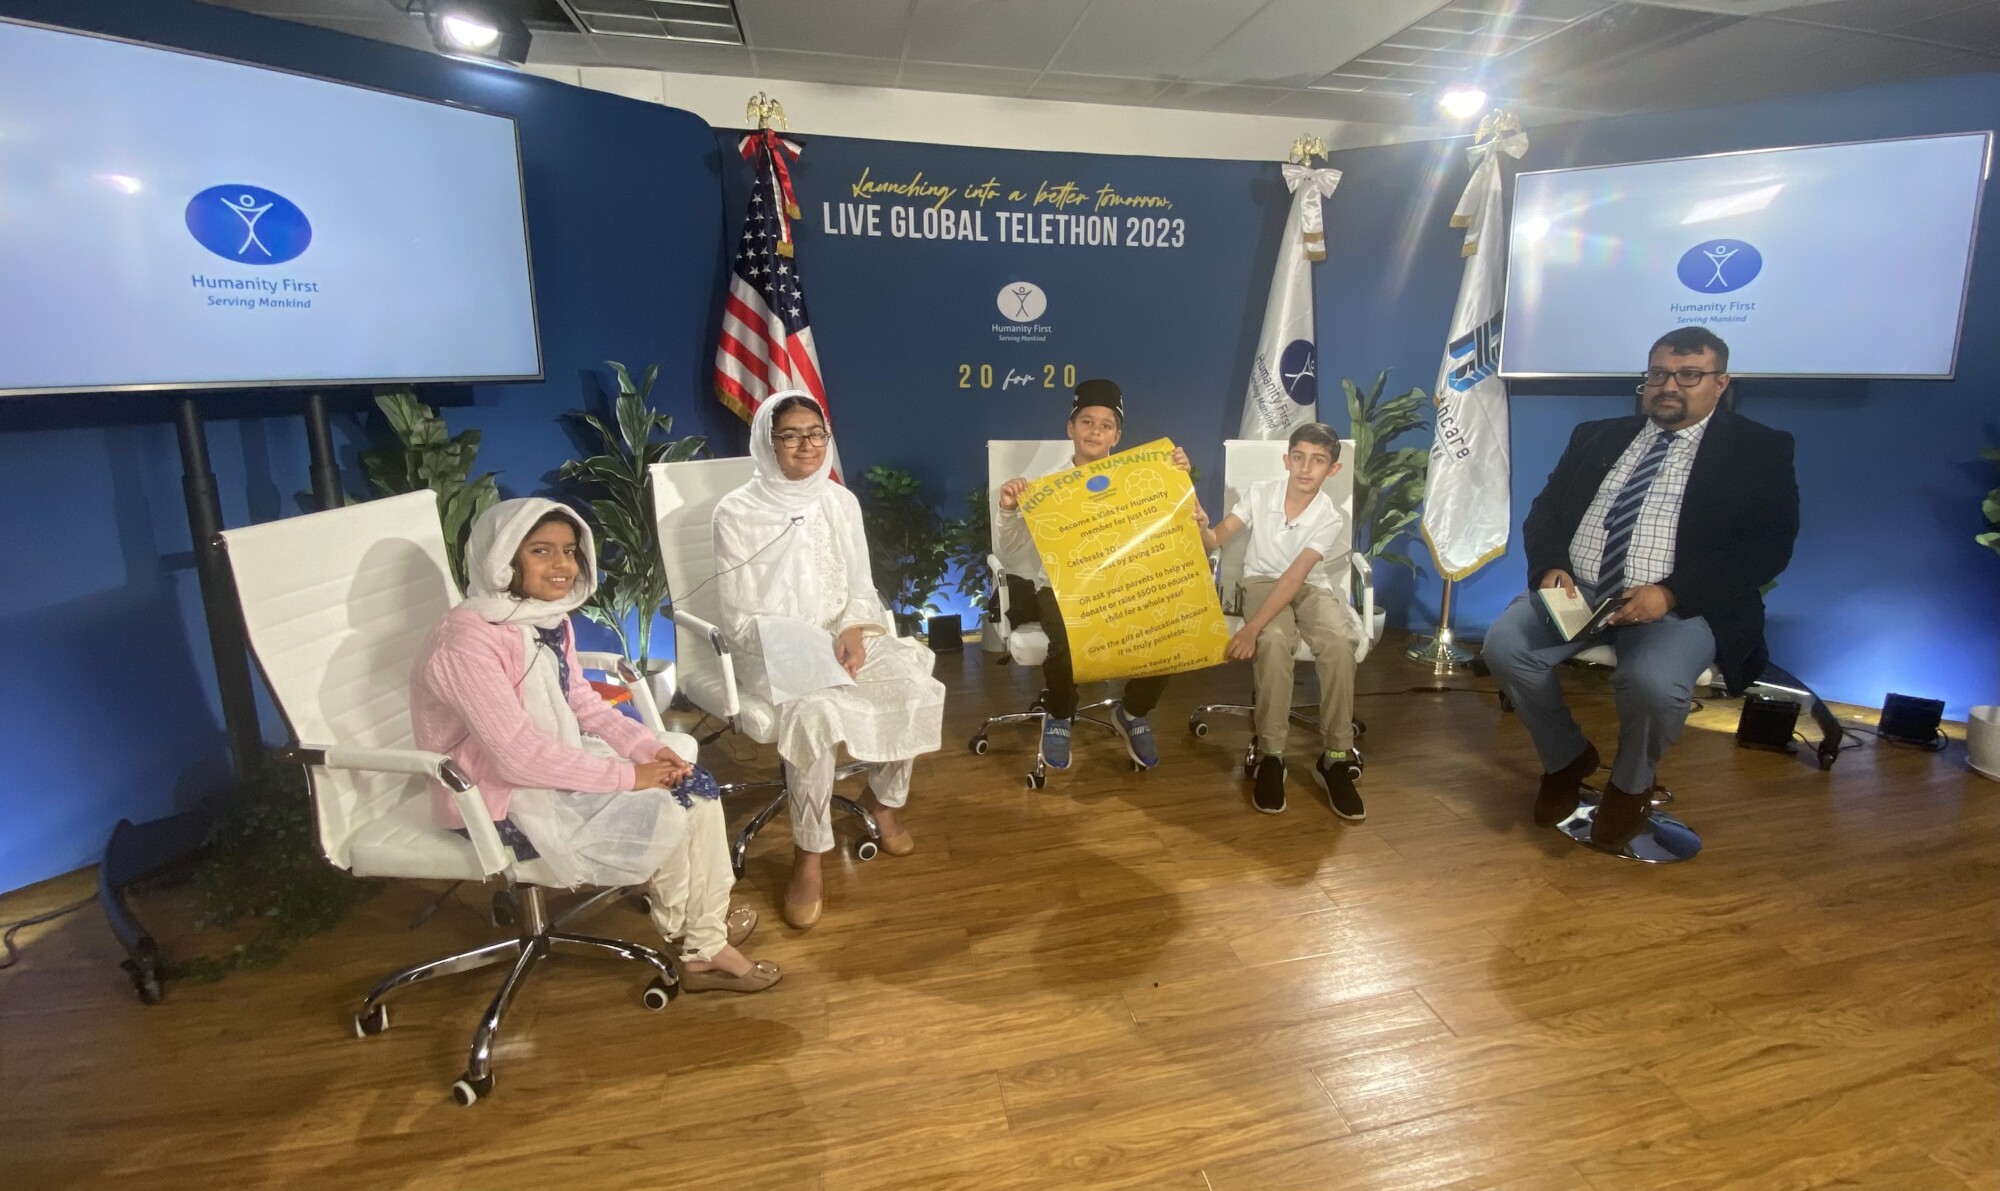 Seated left to right in front of a banner reading Live Global Telethon 2023 are a young girls wearing a pink cardigan and a white headscarf, an older girl wearing all white and a headscarf, two young boys in polo shirts holding a yellow poster, and a man in a suit.